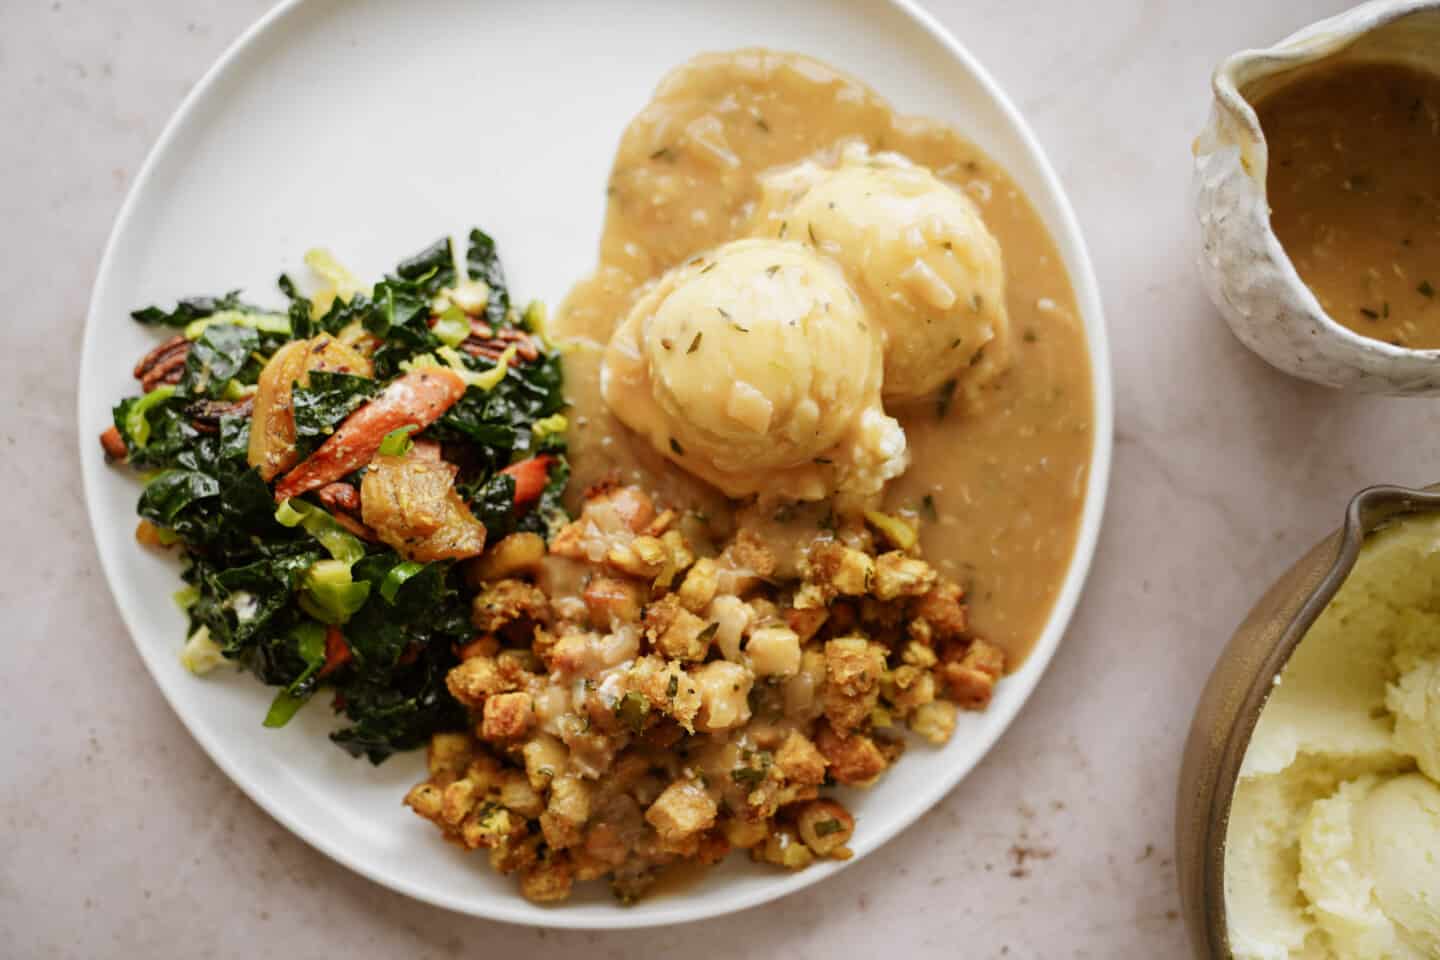 Plate of holiday food with a stuffing recipe on the side